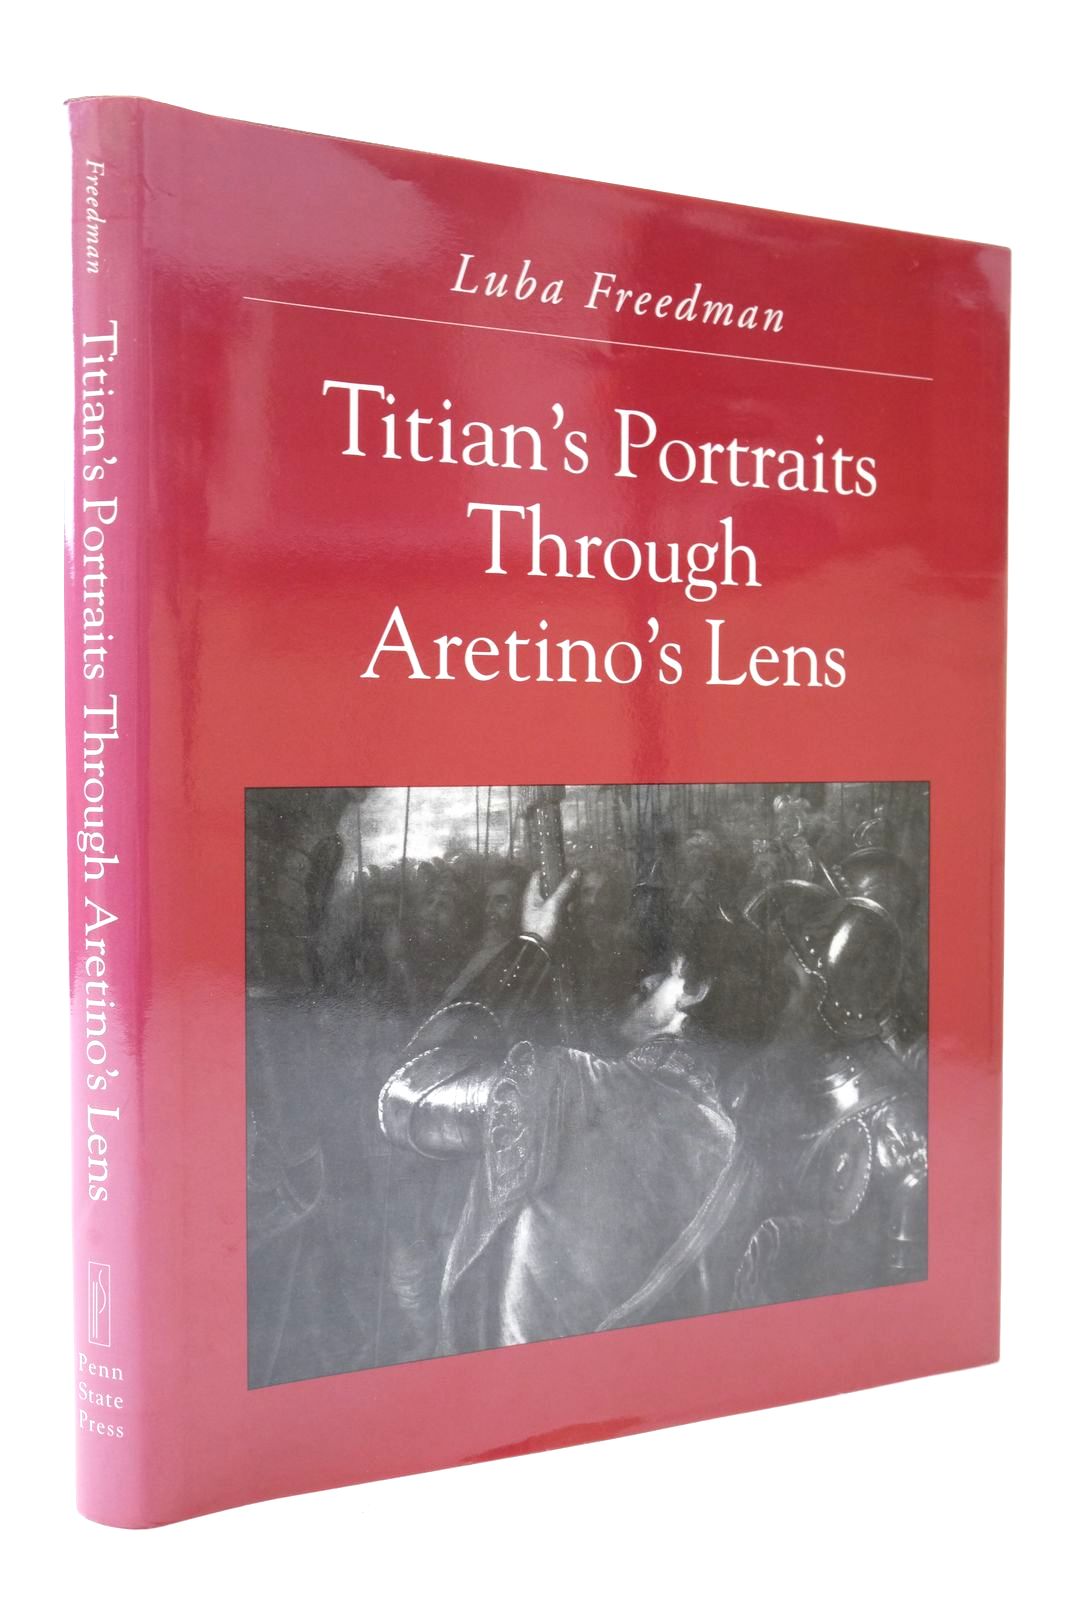 Photo of TITIAN'S PORTRAITS THROUGH ARETINO'S LENS written by Freedman, Luba Aretino, Pietro illustrated by Titian, published by The Pennsylvania State University Press (STOCK CODE: 2138860)  for sale by Stella & Rose's Books